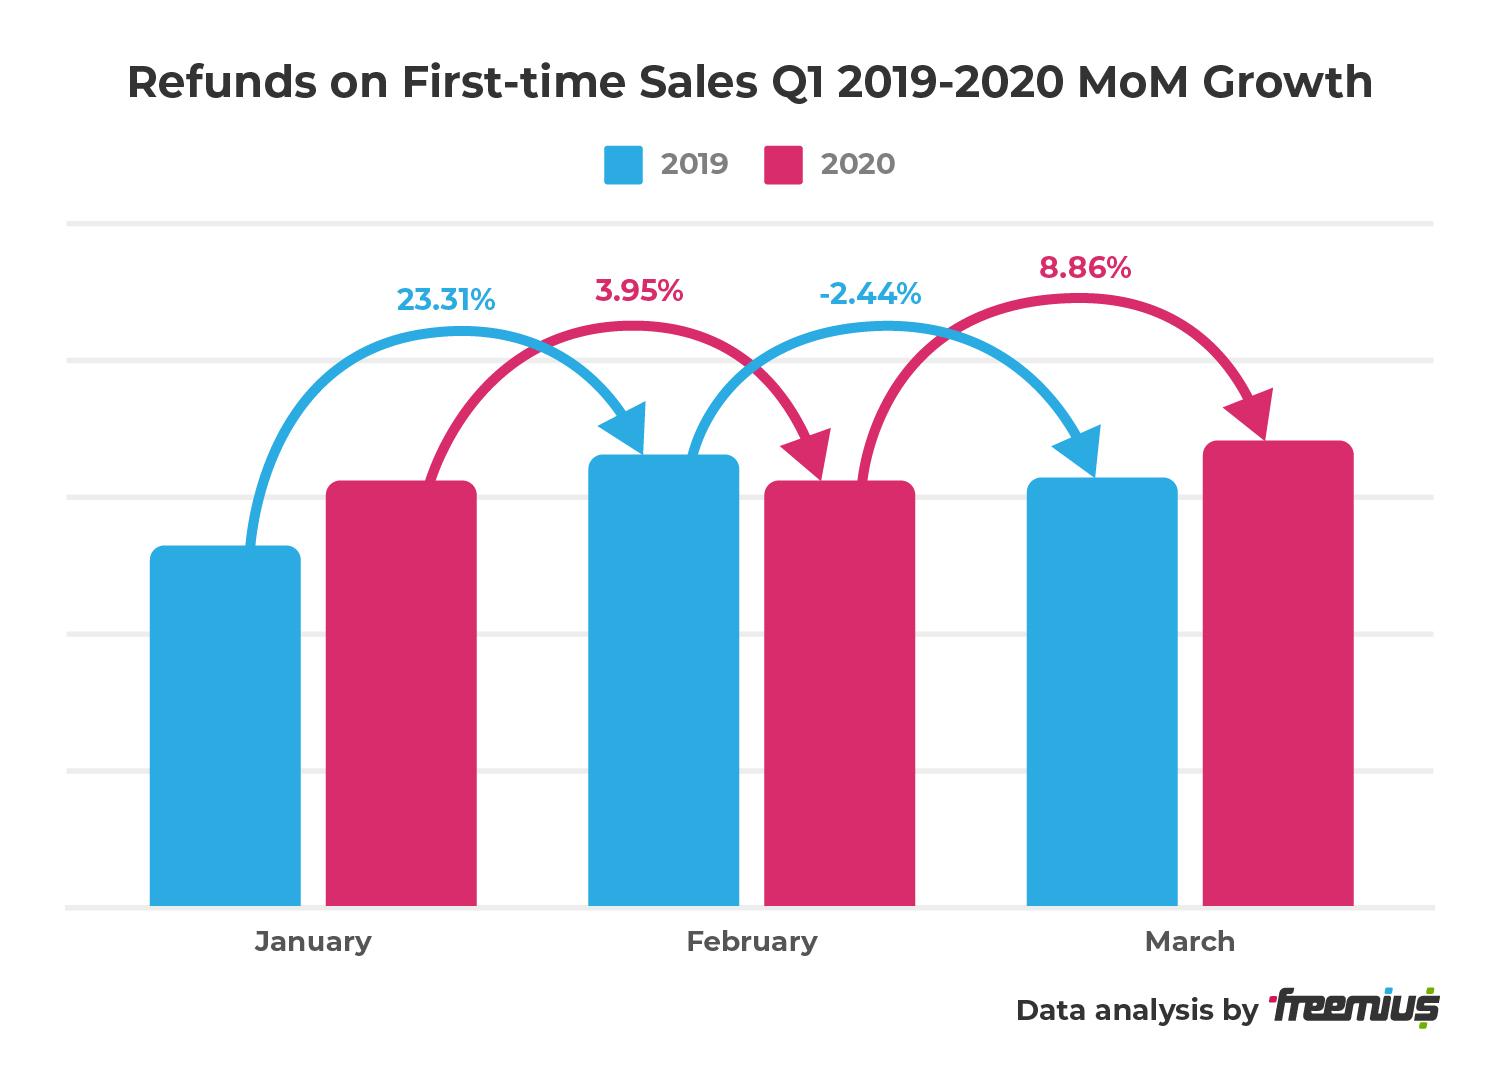 Freemius data analysis - Refunds on First-time Sales Q1 2019-2020 MoM Growth